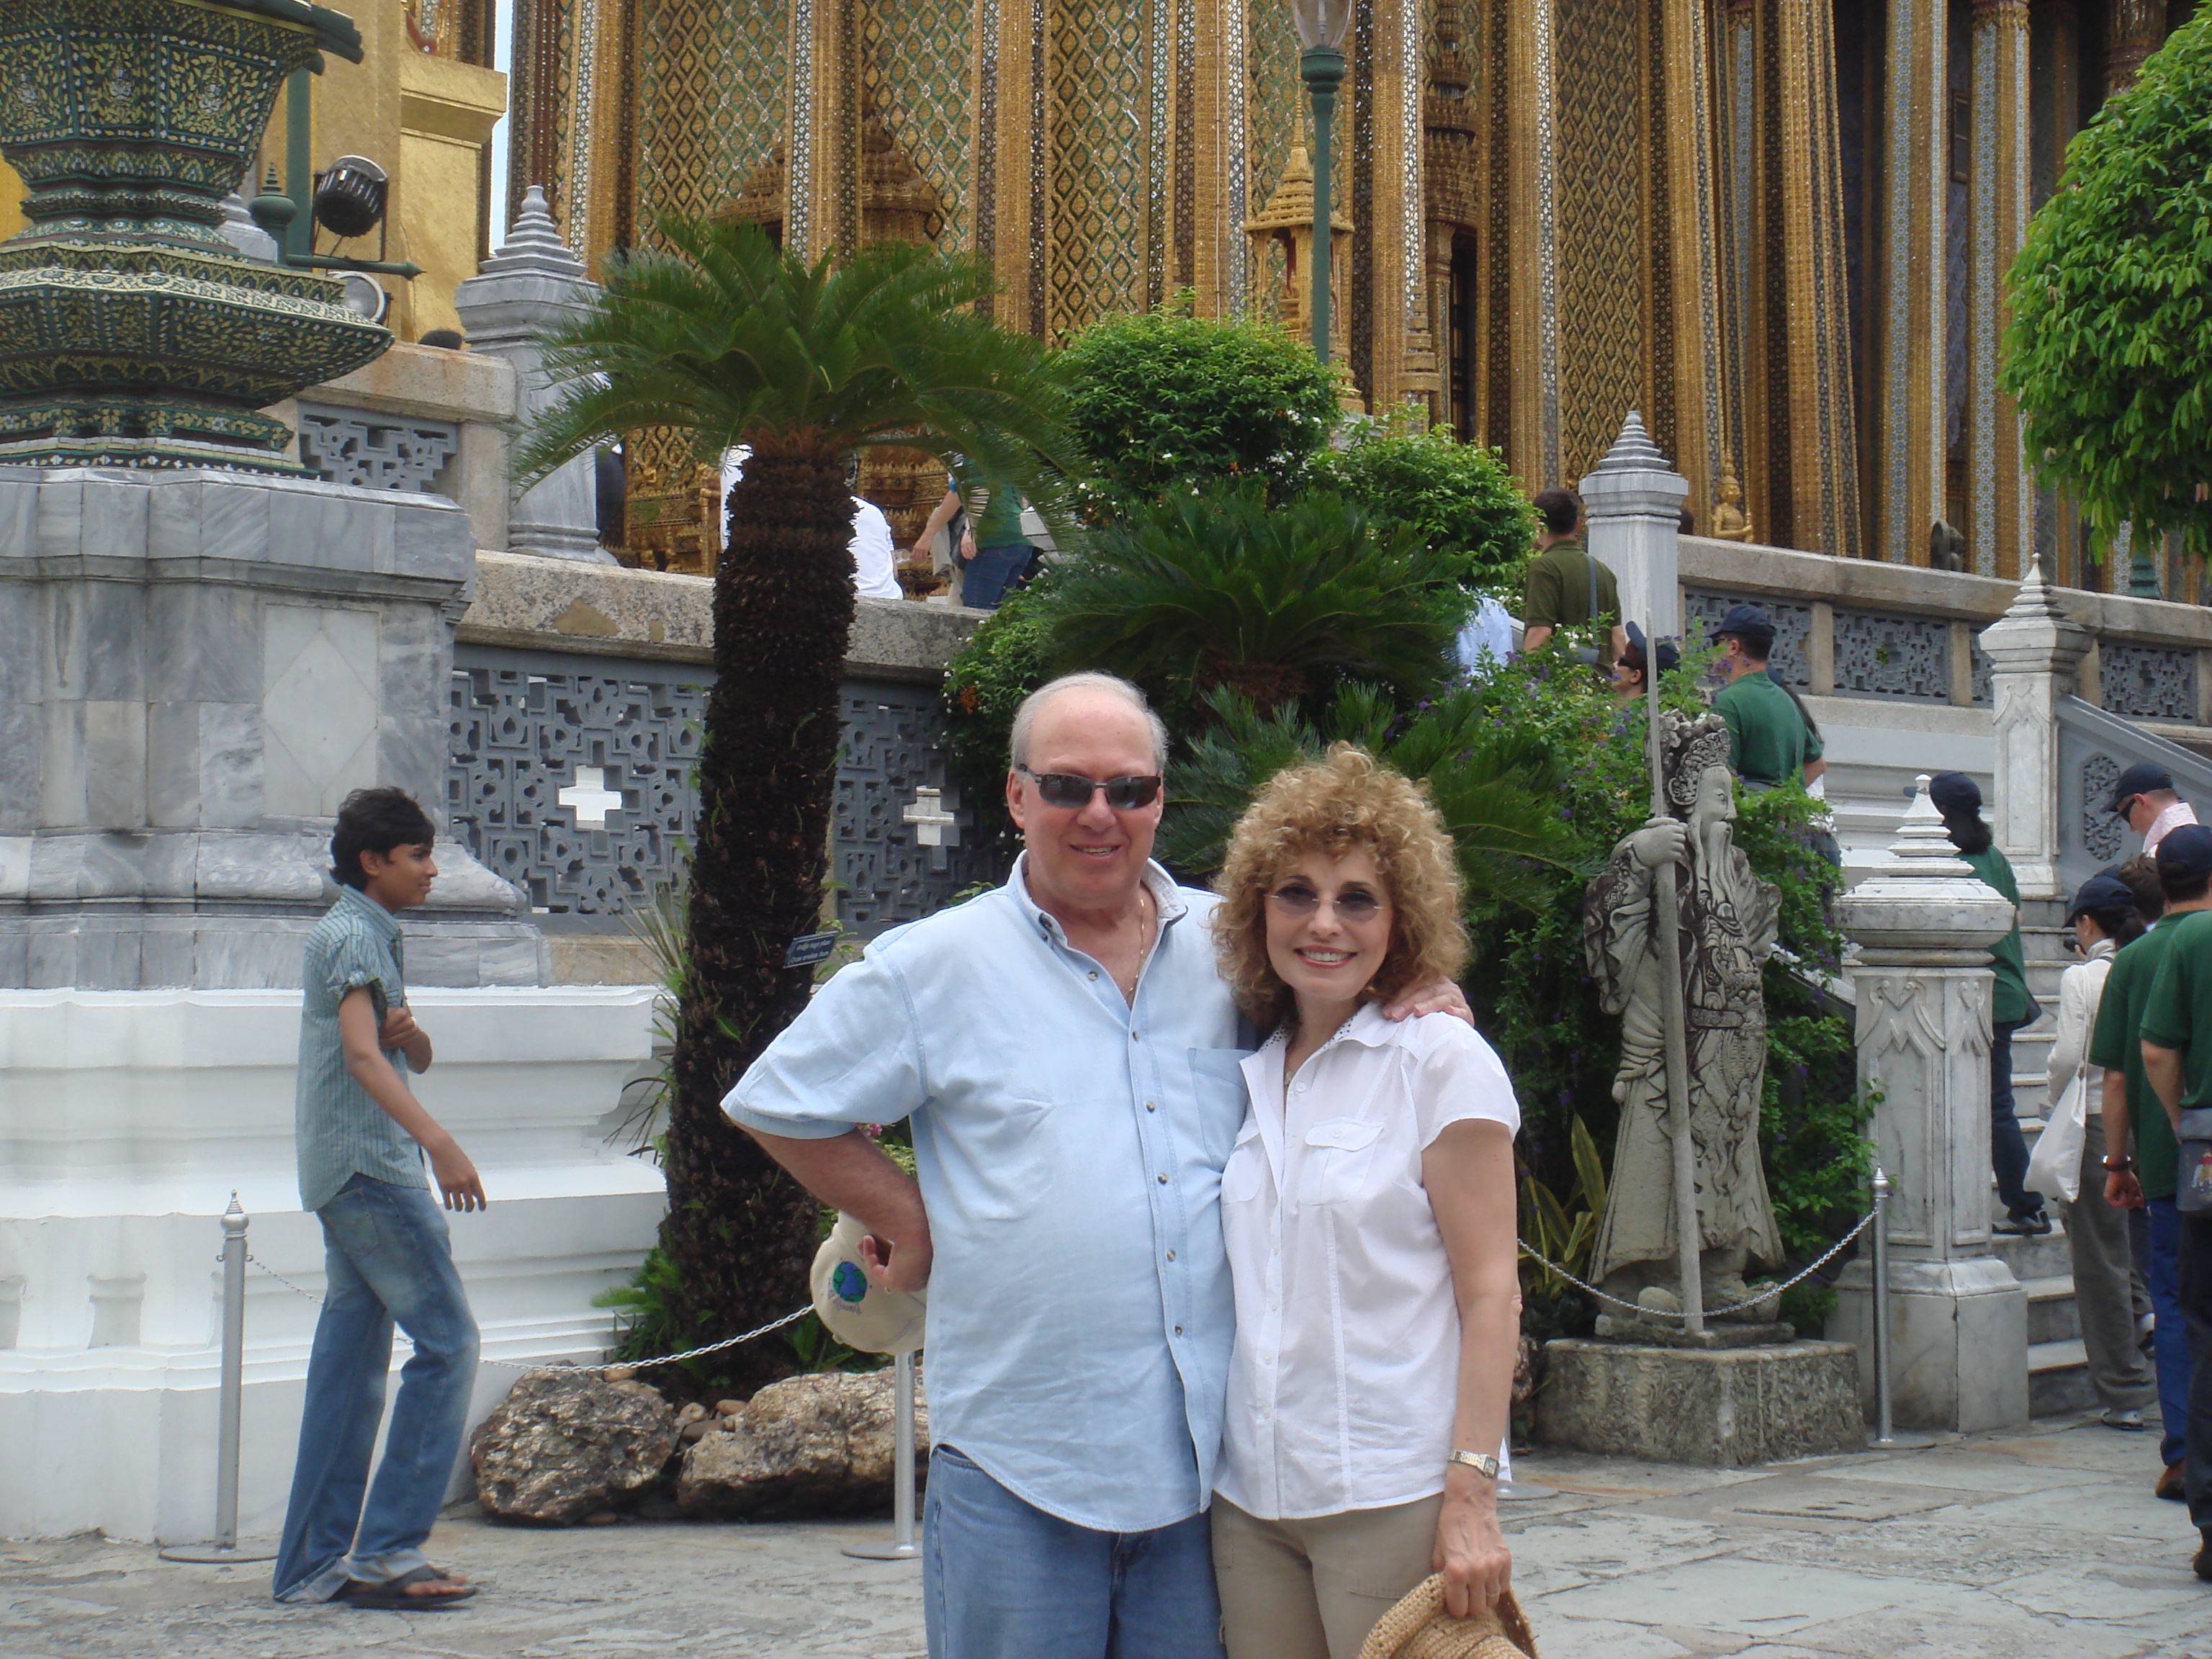 Peggy & husband Ilan in Thailand.